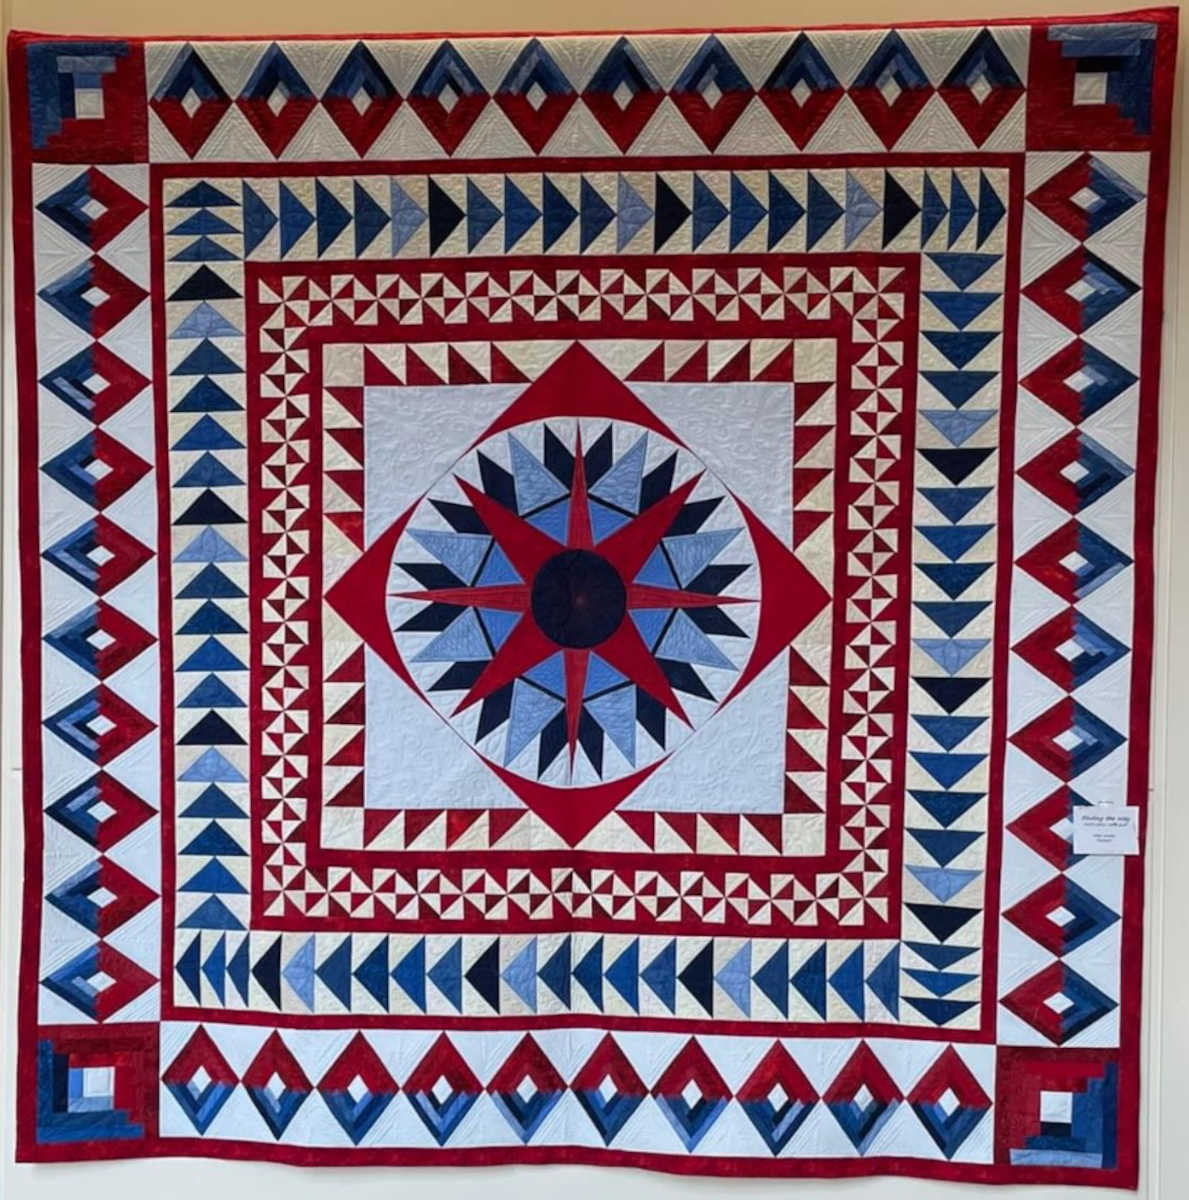 The 2020 - 2021 raffle quilt was designed by Adrienne Randal, with Judy Shapiro designing the center medallion. It was pieced by Adrienne Randal and Jeanette Bayliss and custom quilted by Debbie Werker.